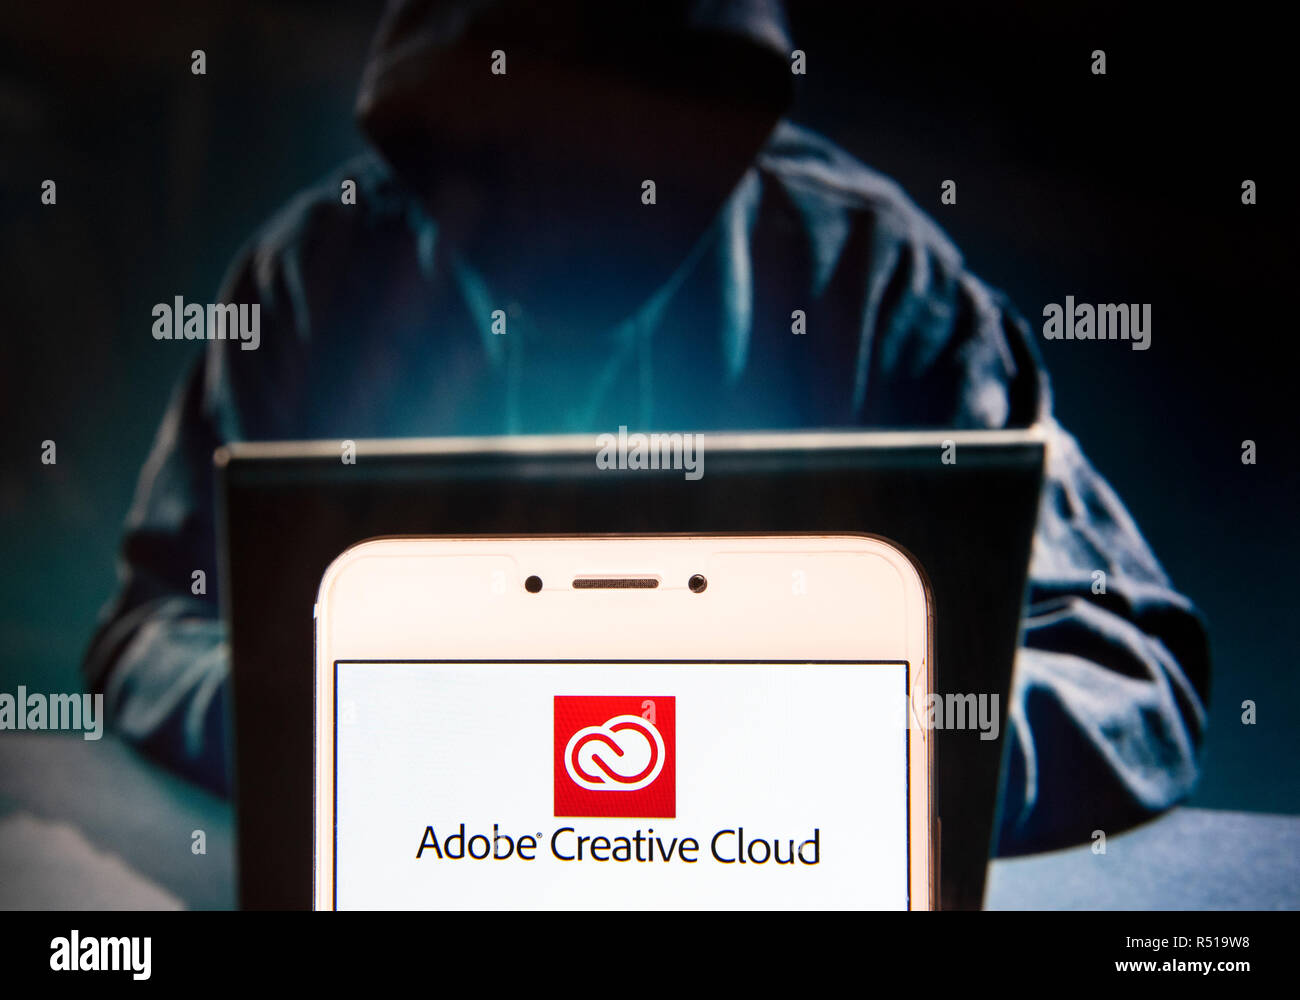 File hosting service and computer software access owned by Adobe Systems, Adobe  Creative Cloud, logo is seen on an Android mobile device with a figure of  hacker in the background Stock Photo -